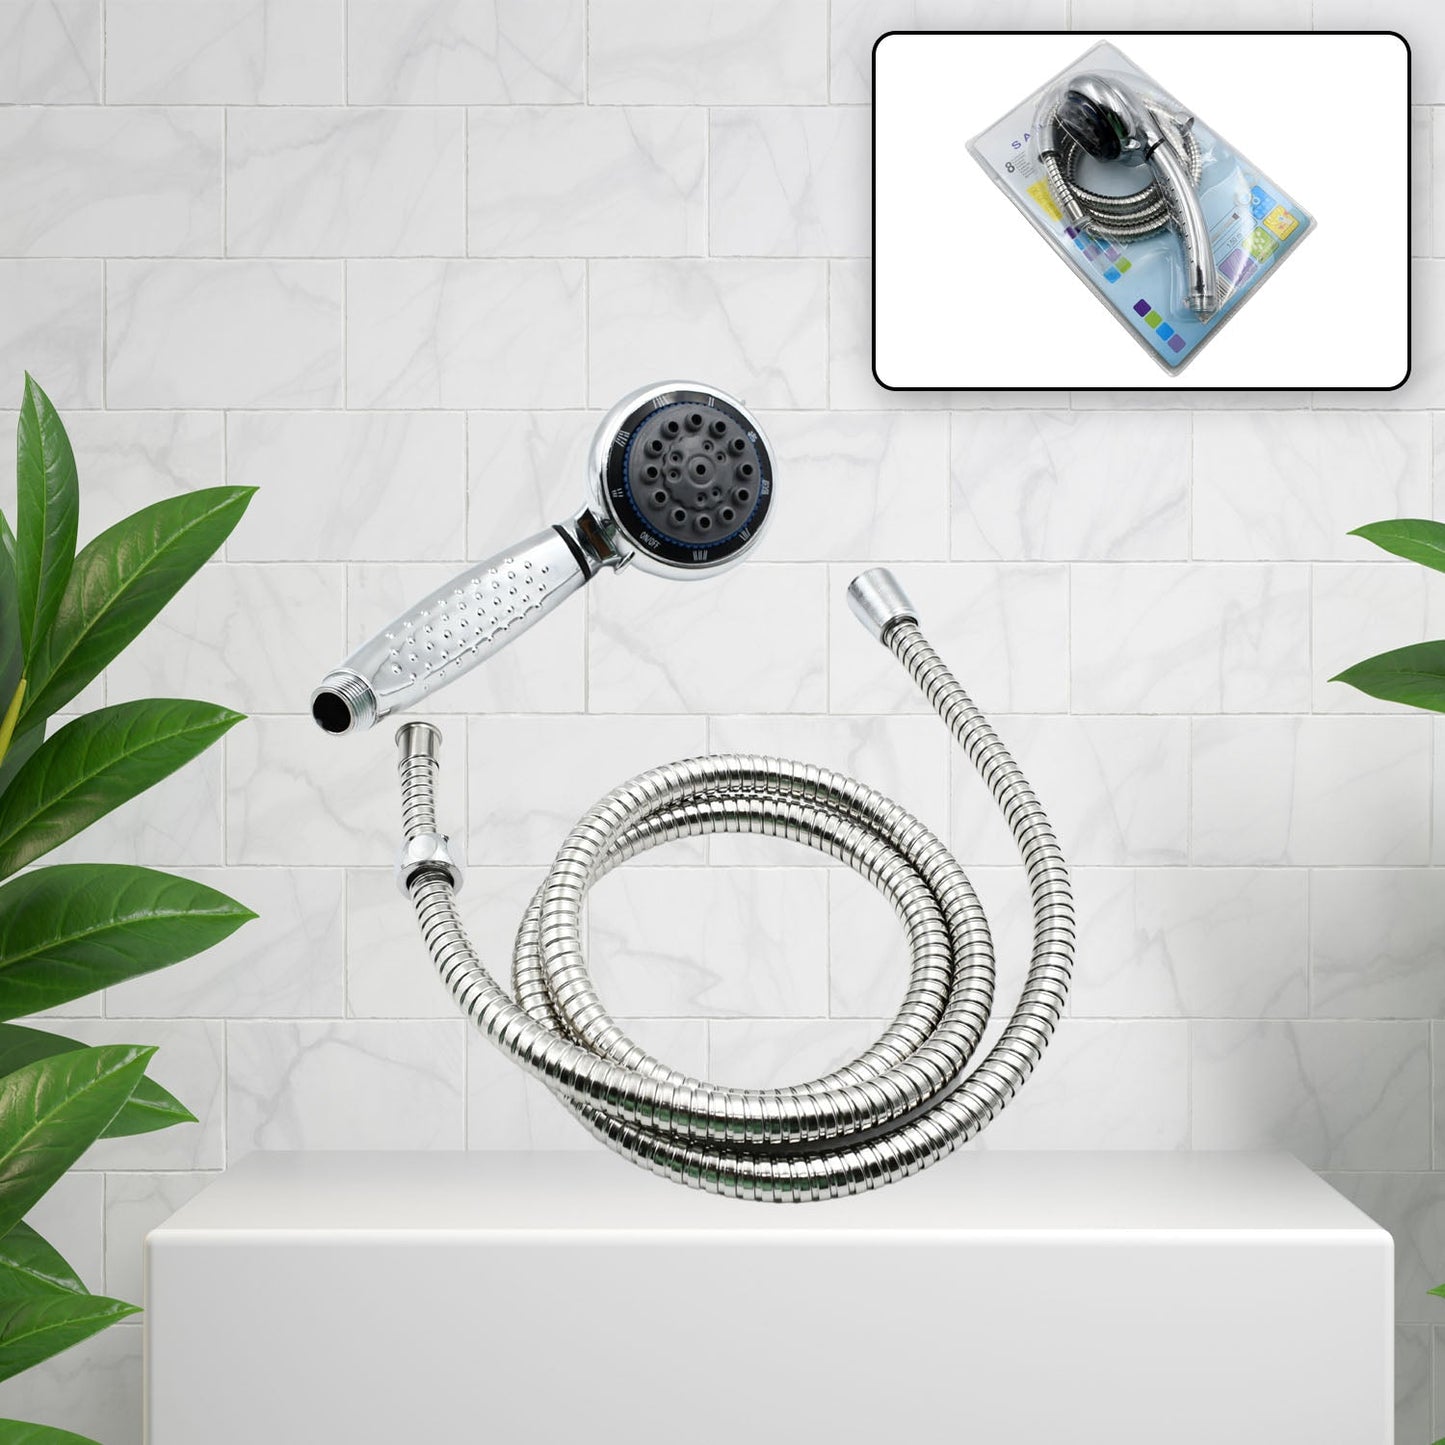 9365 Shower Head and Stainless Steel Hose Multi-Function Plastic High Pressure Shower Spray for Bathroom